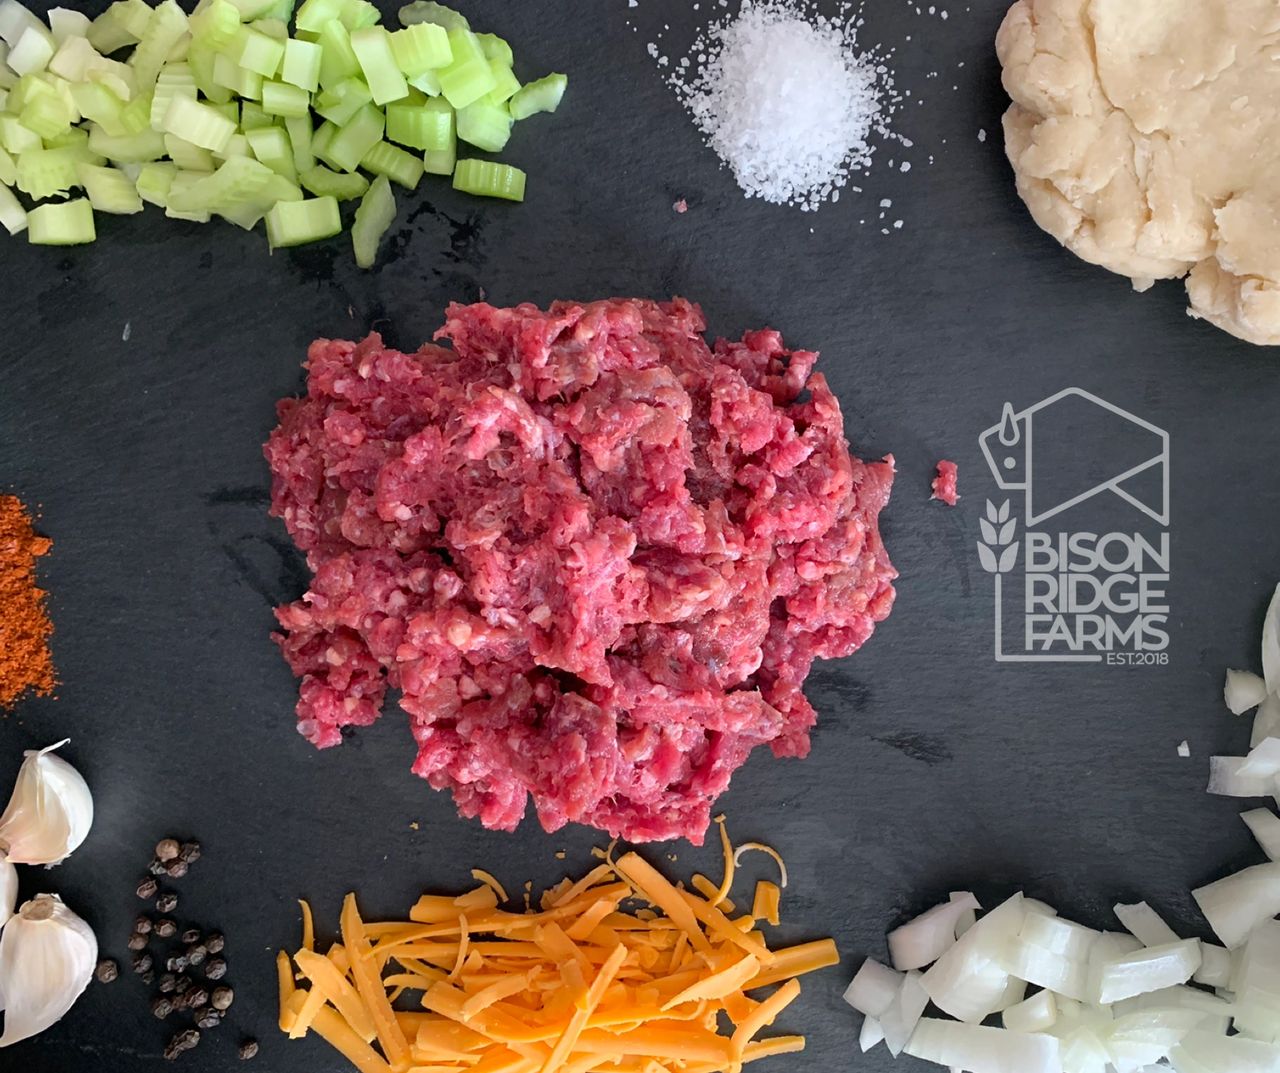 Ingredients to make bison and cheddar pie